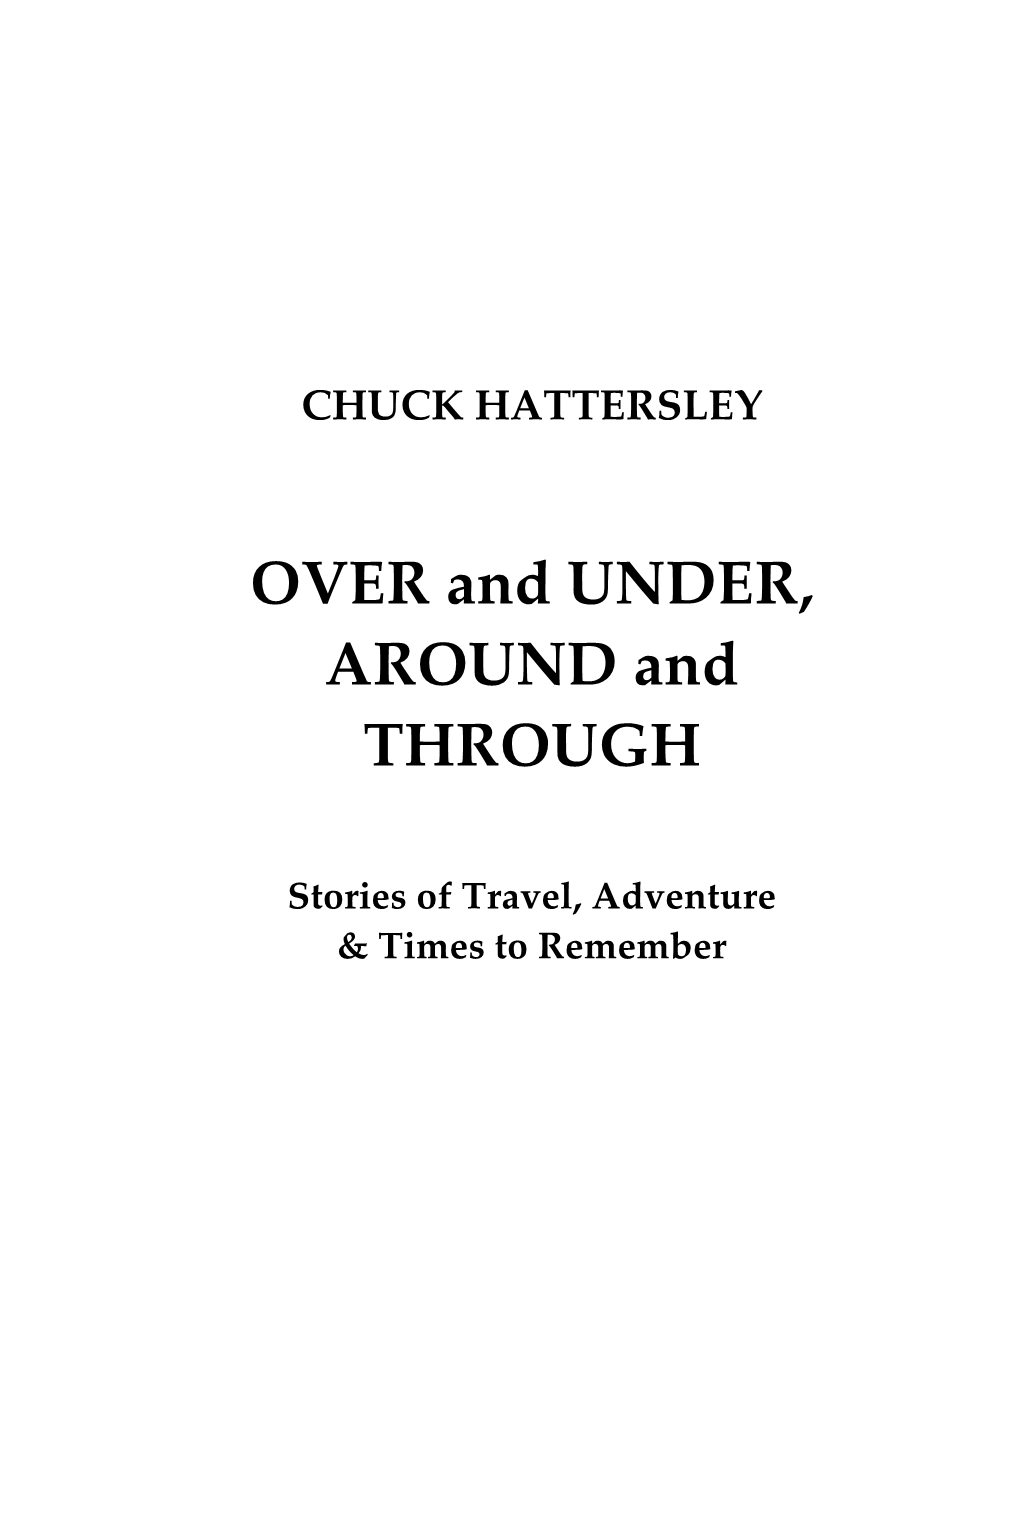 Over and Under, Around and Through a Collection of Stories by Chuck Hattersley